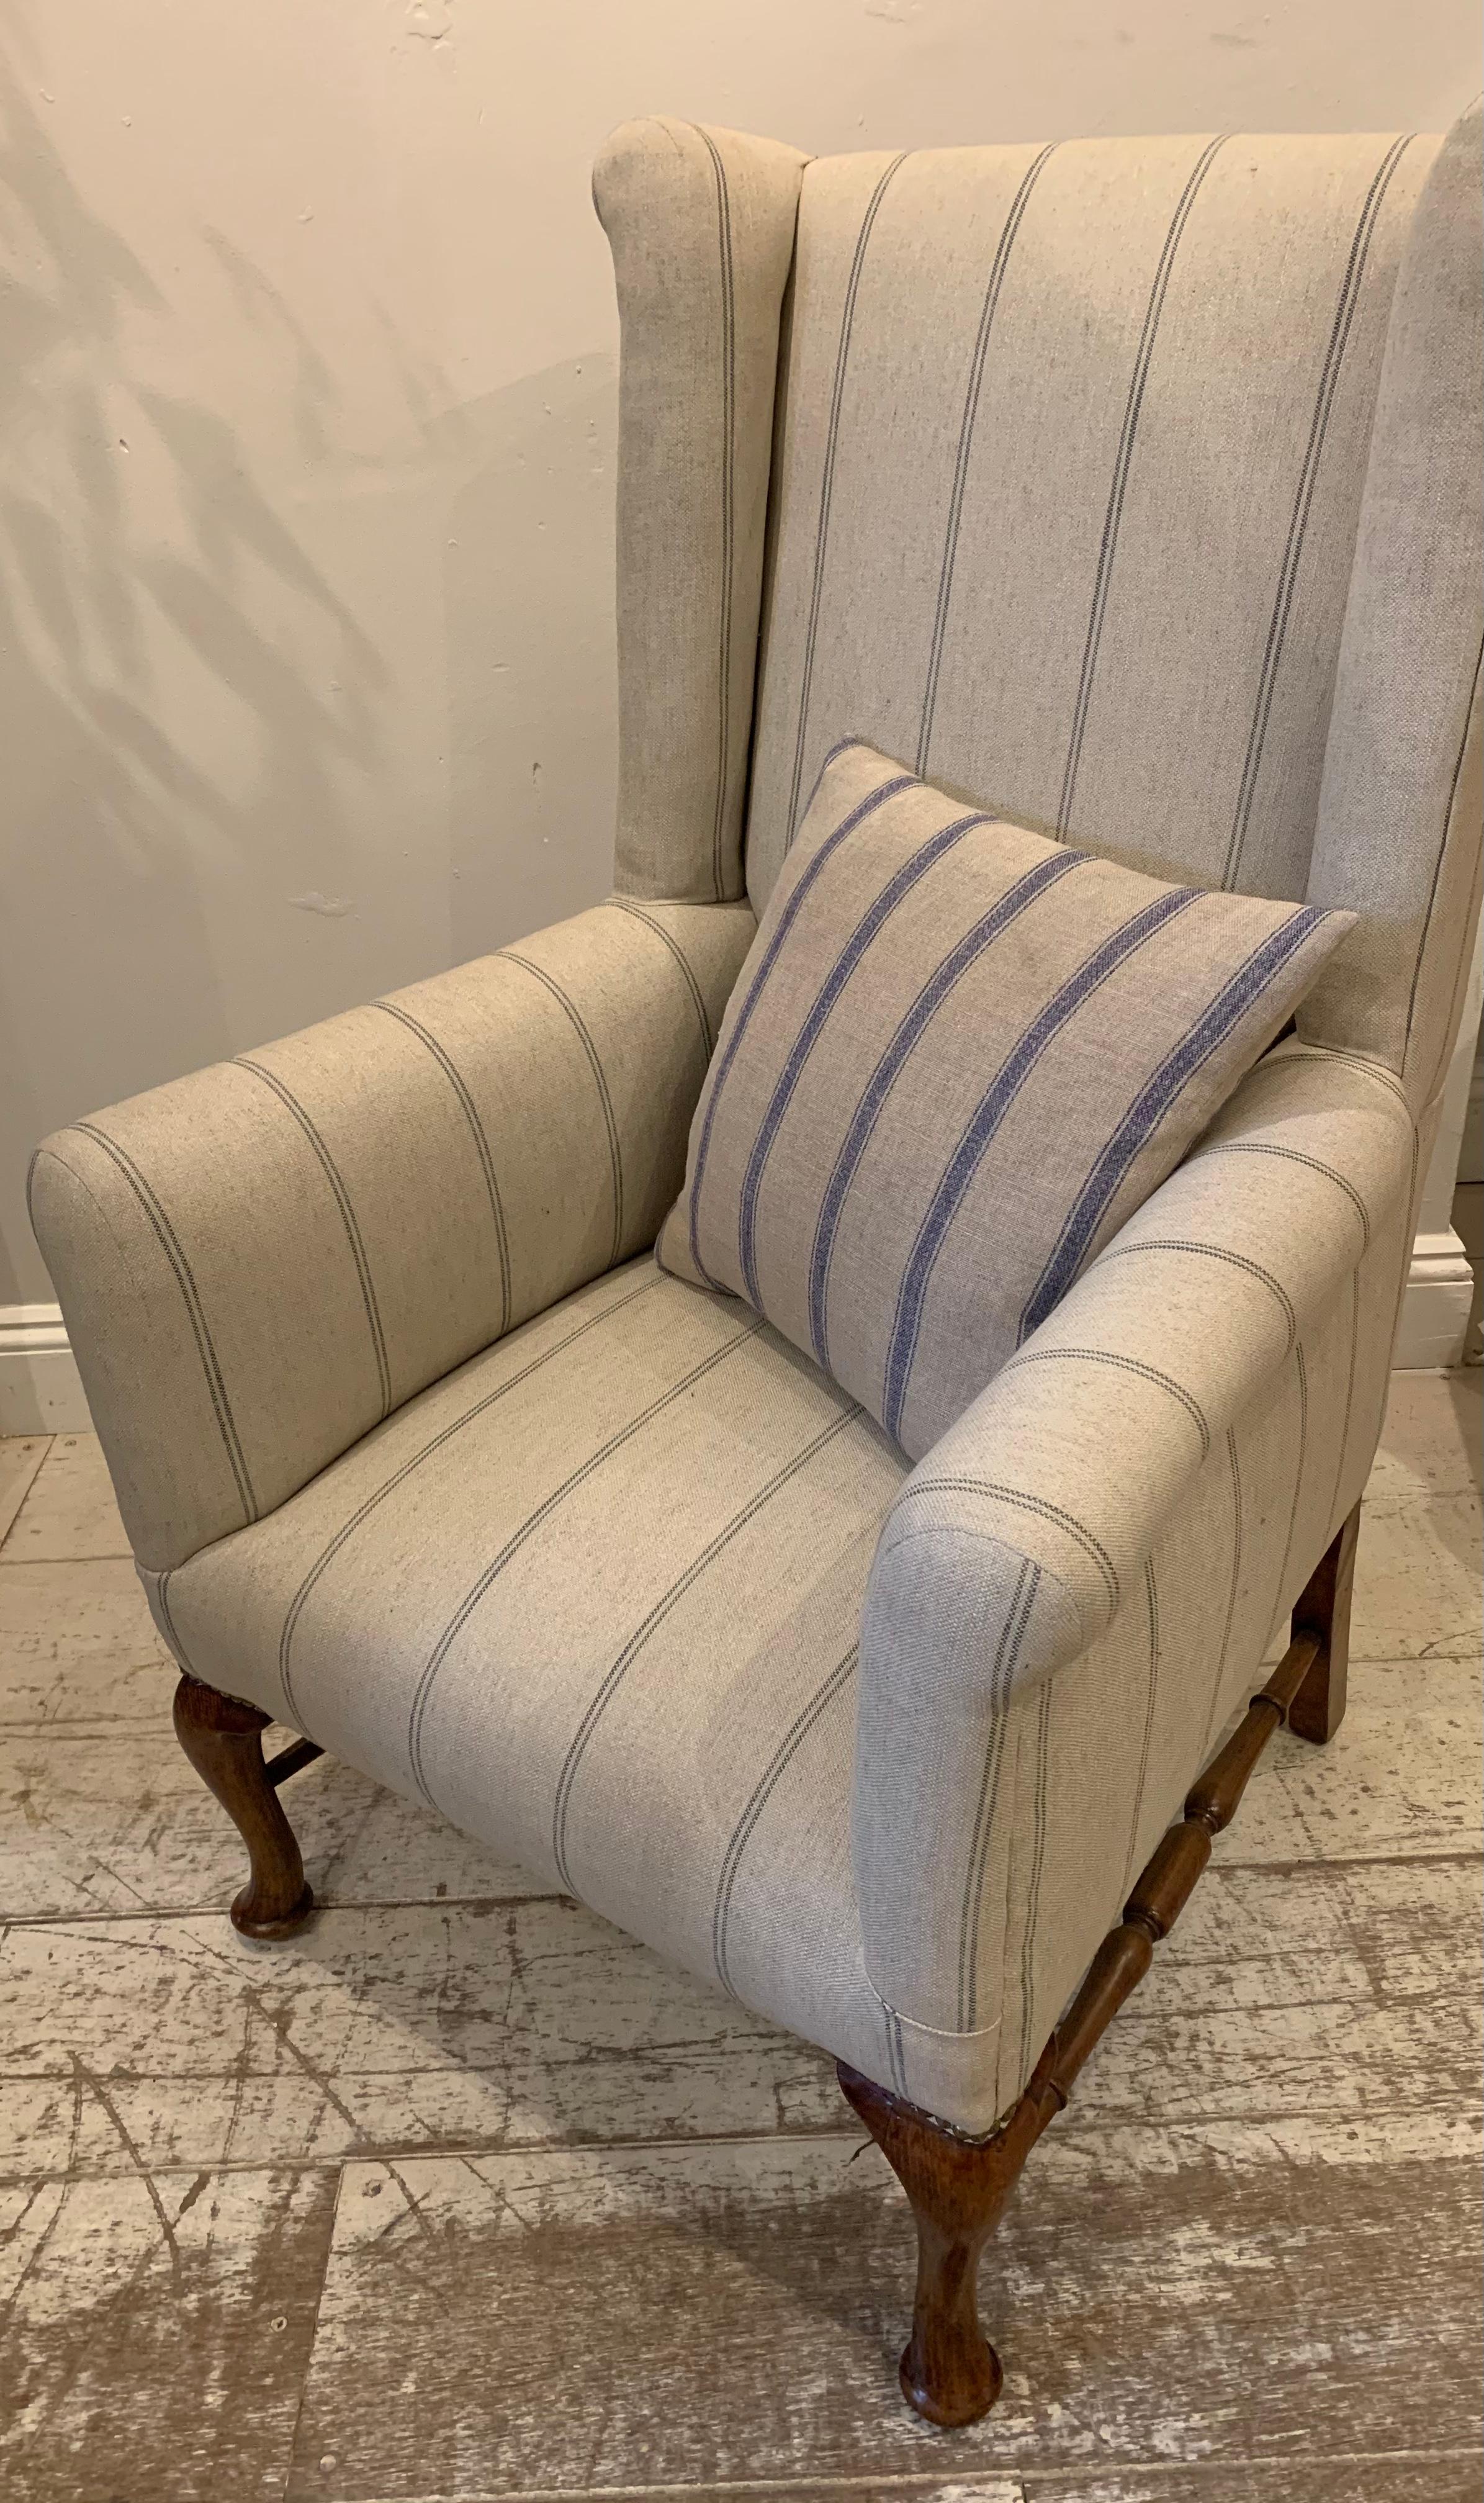 Circa 1900 English Wingback Armchair with Walnut Legs in a Neutral Linen Fabric 3